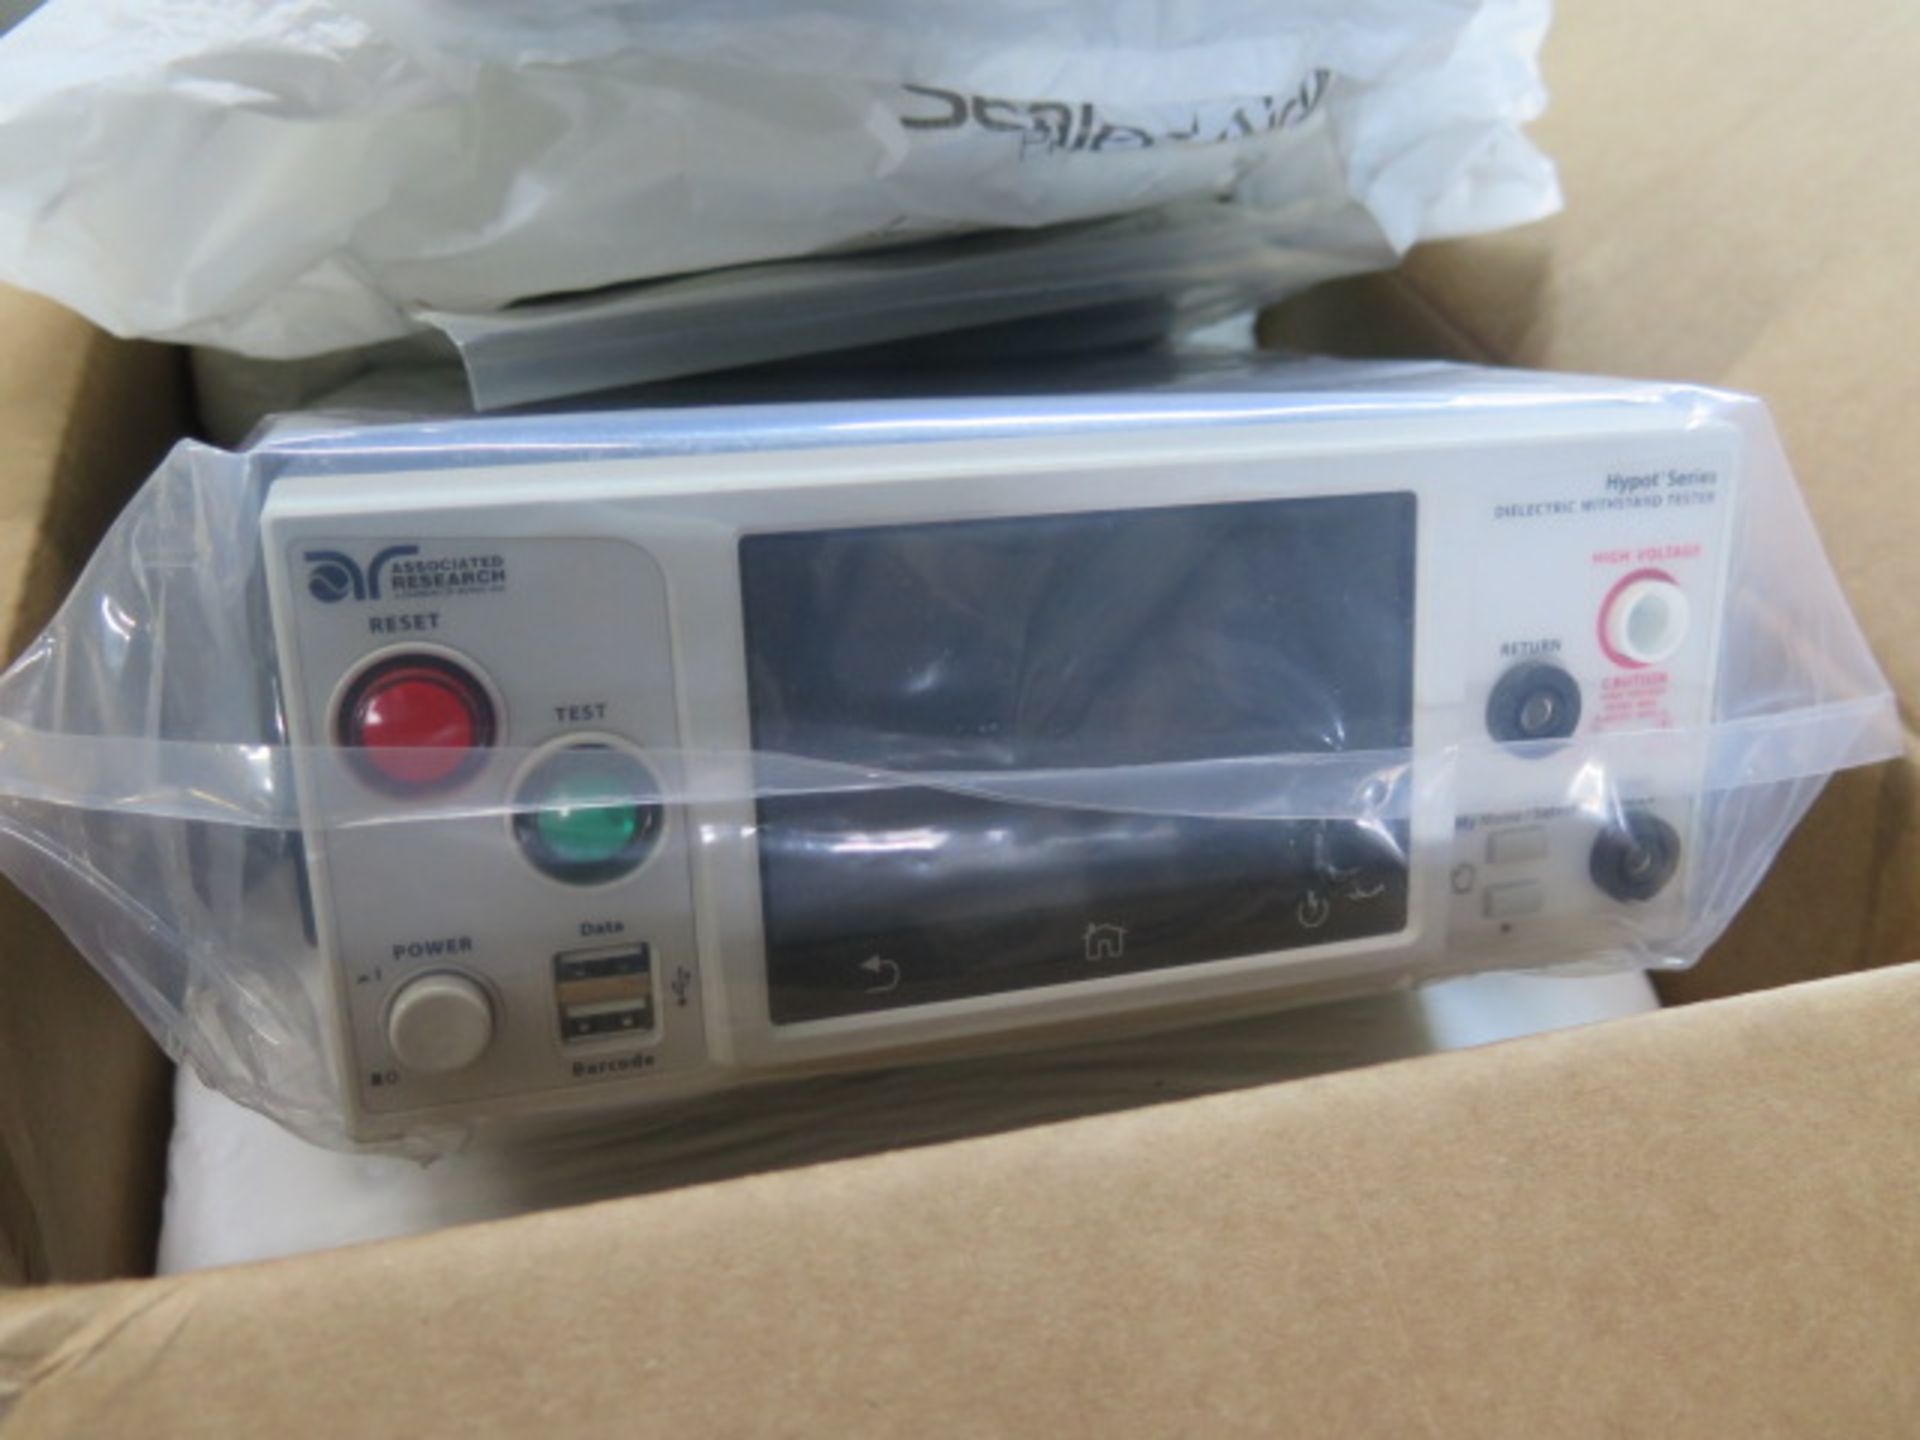 Associated Research Hypot Series Dielectric Withsdtand Tester (NEW) (SOLD AS-IS - NO WARRANTY) - Image 3 of 5